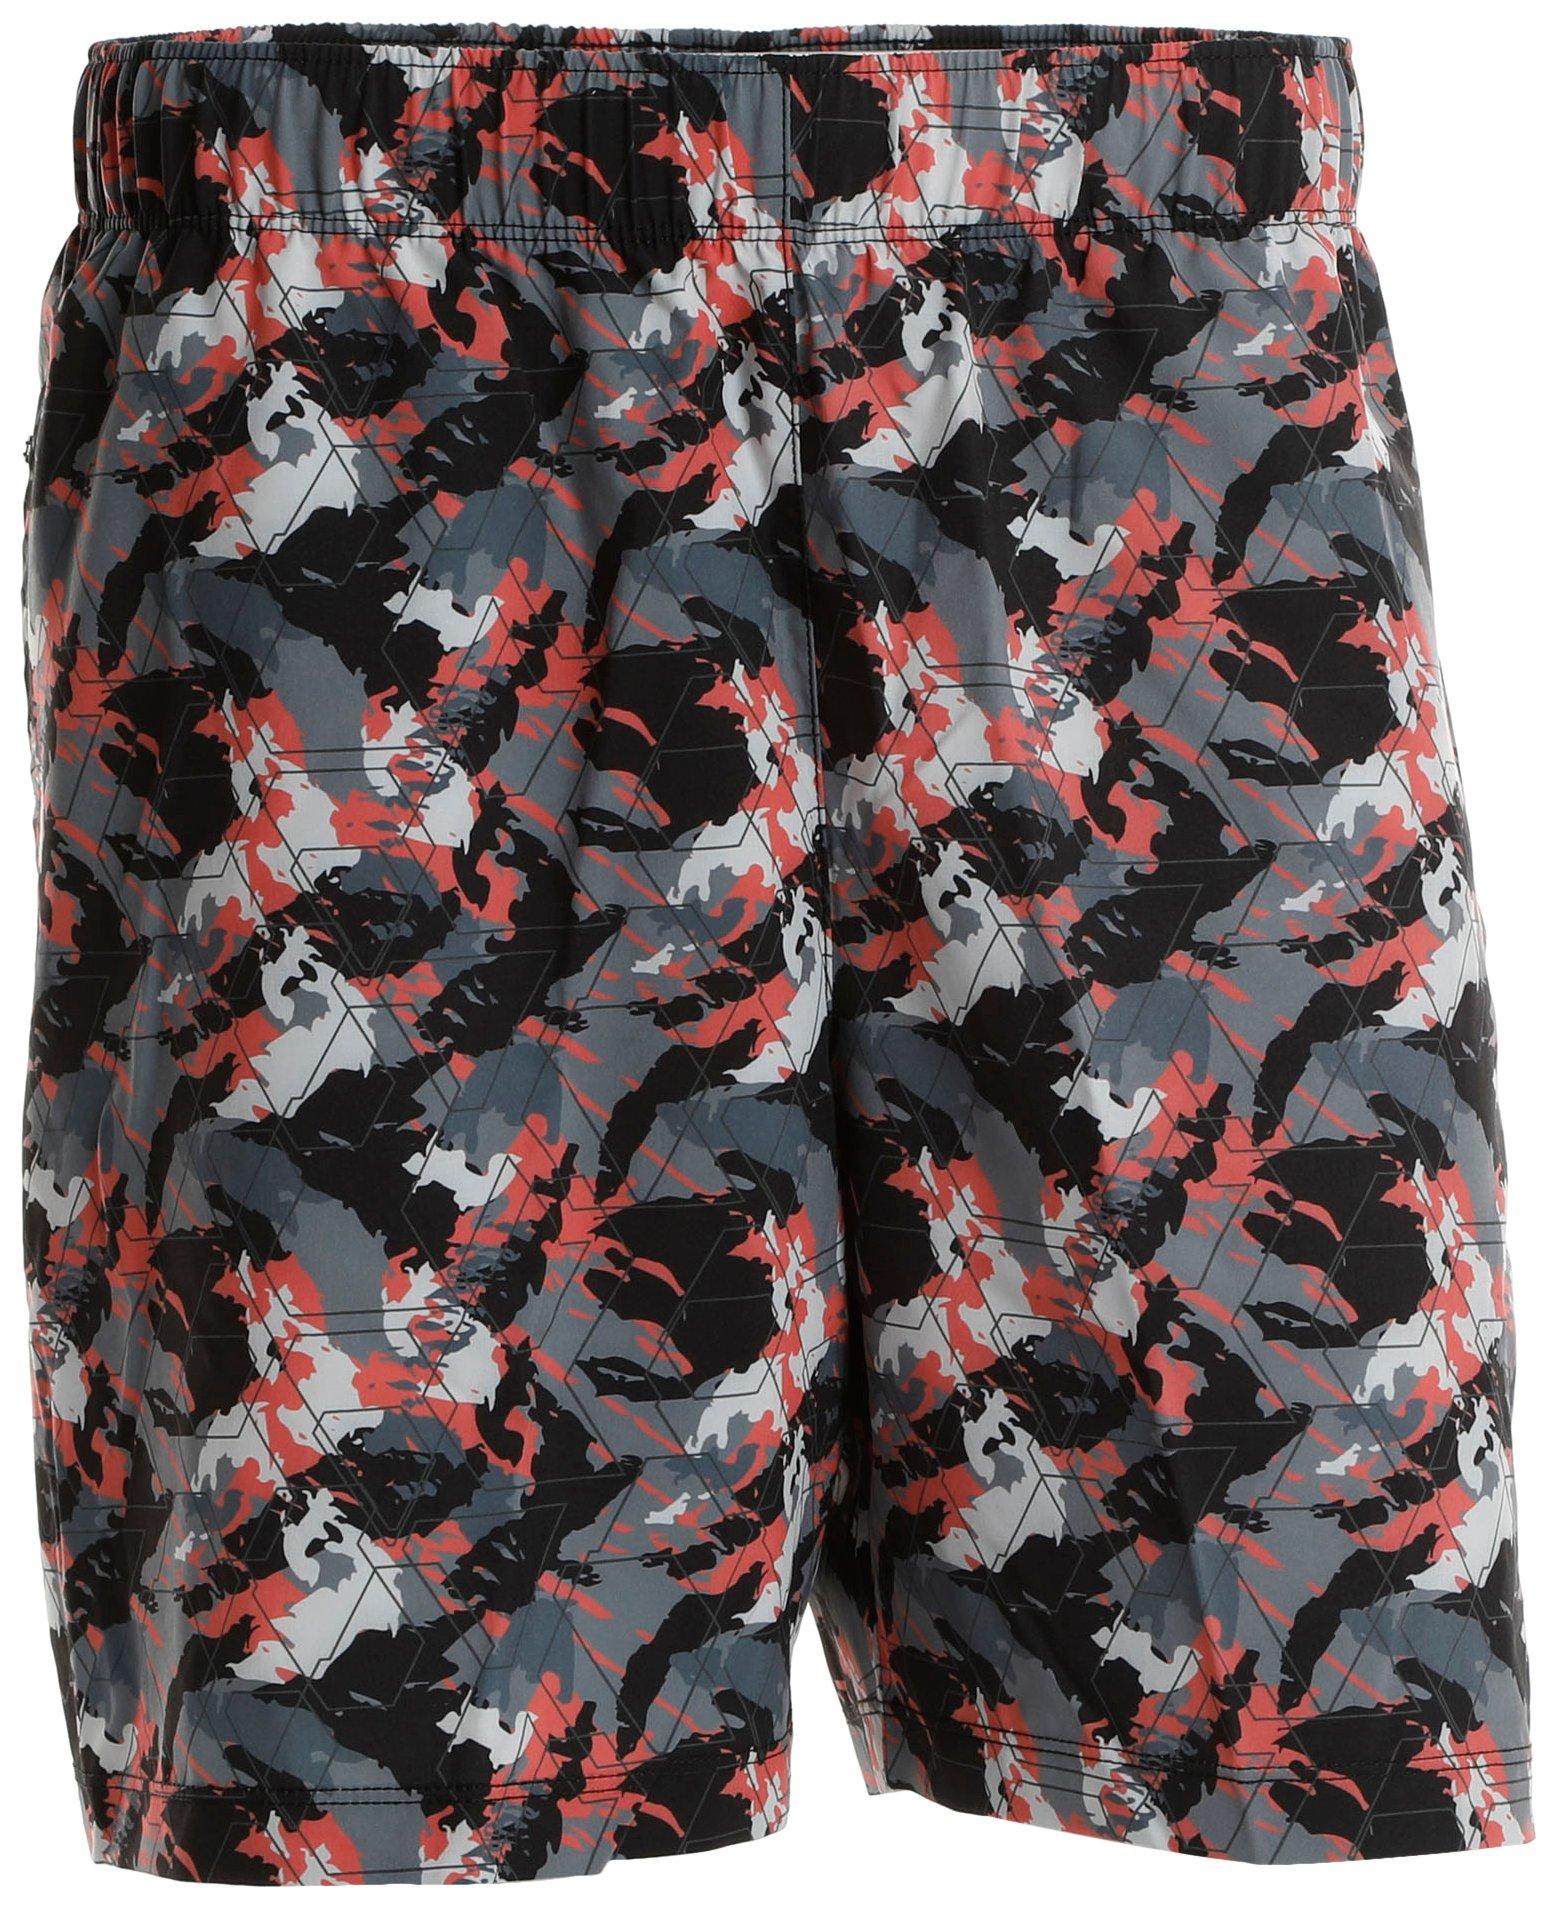 RB3 Active Mens 7 In. Print Athletic Performance Shorts